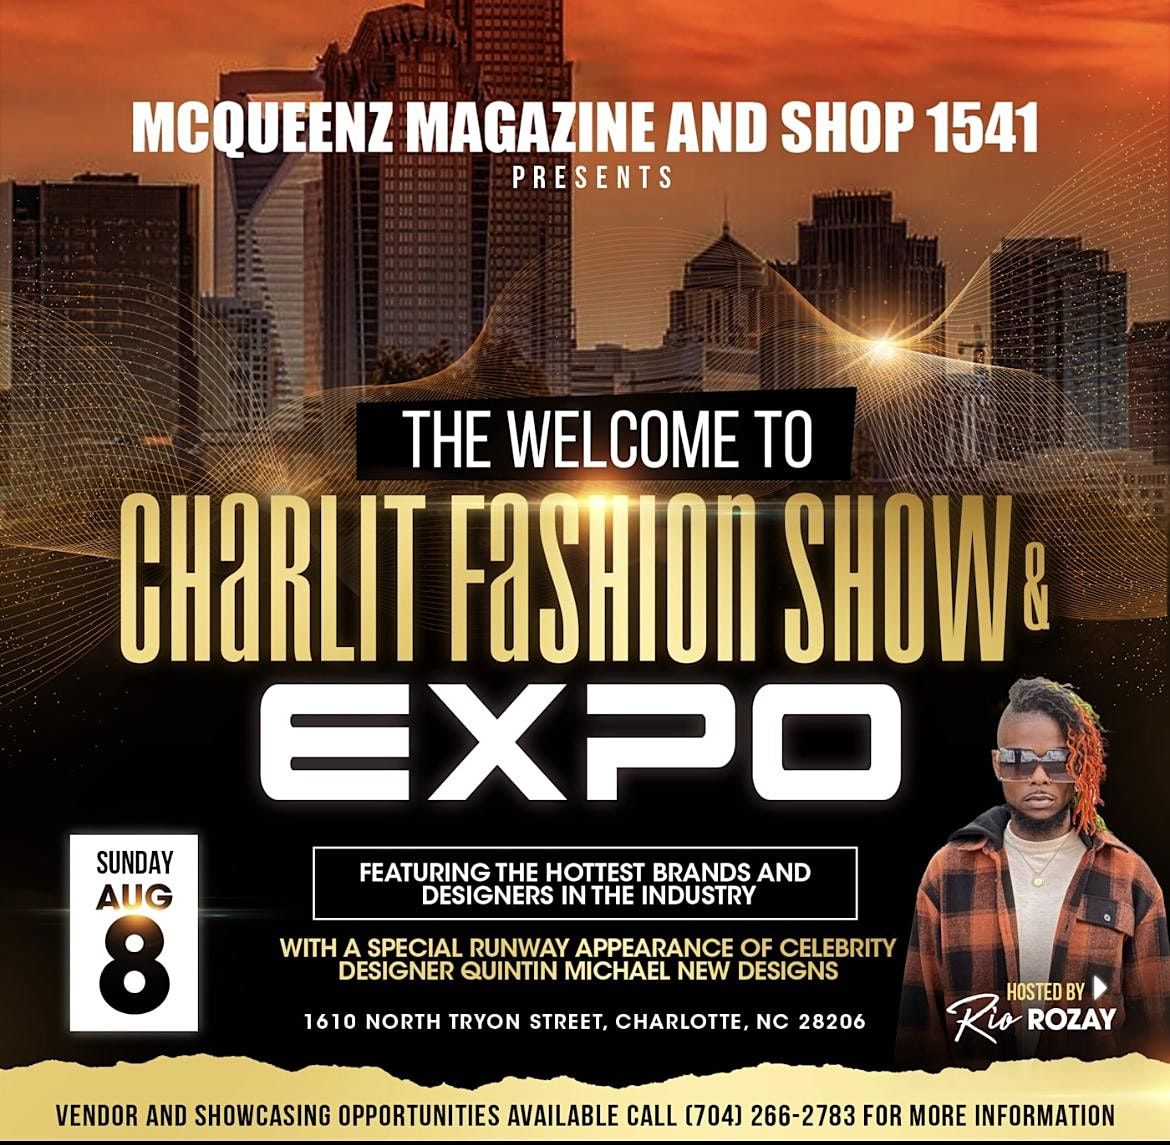 The Welcome 2 Charlit Fashion Show and Expo